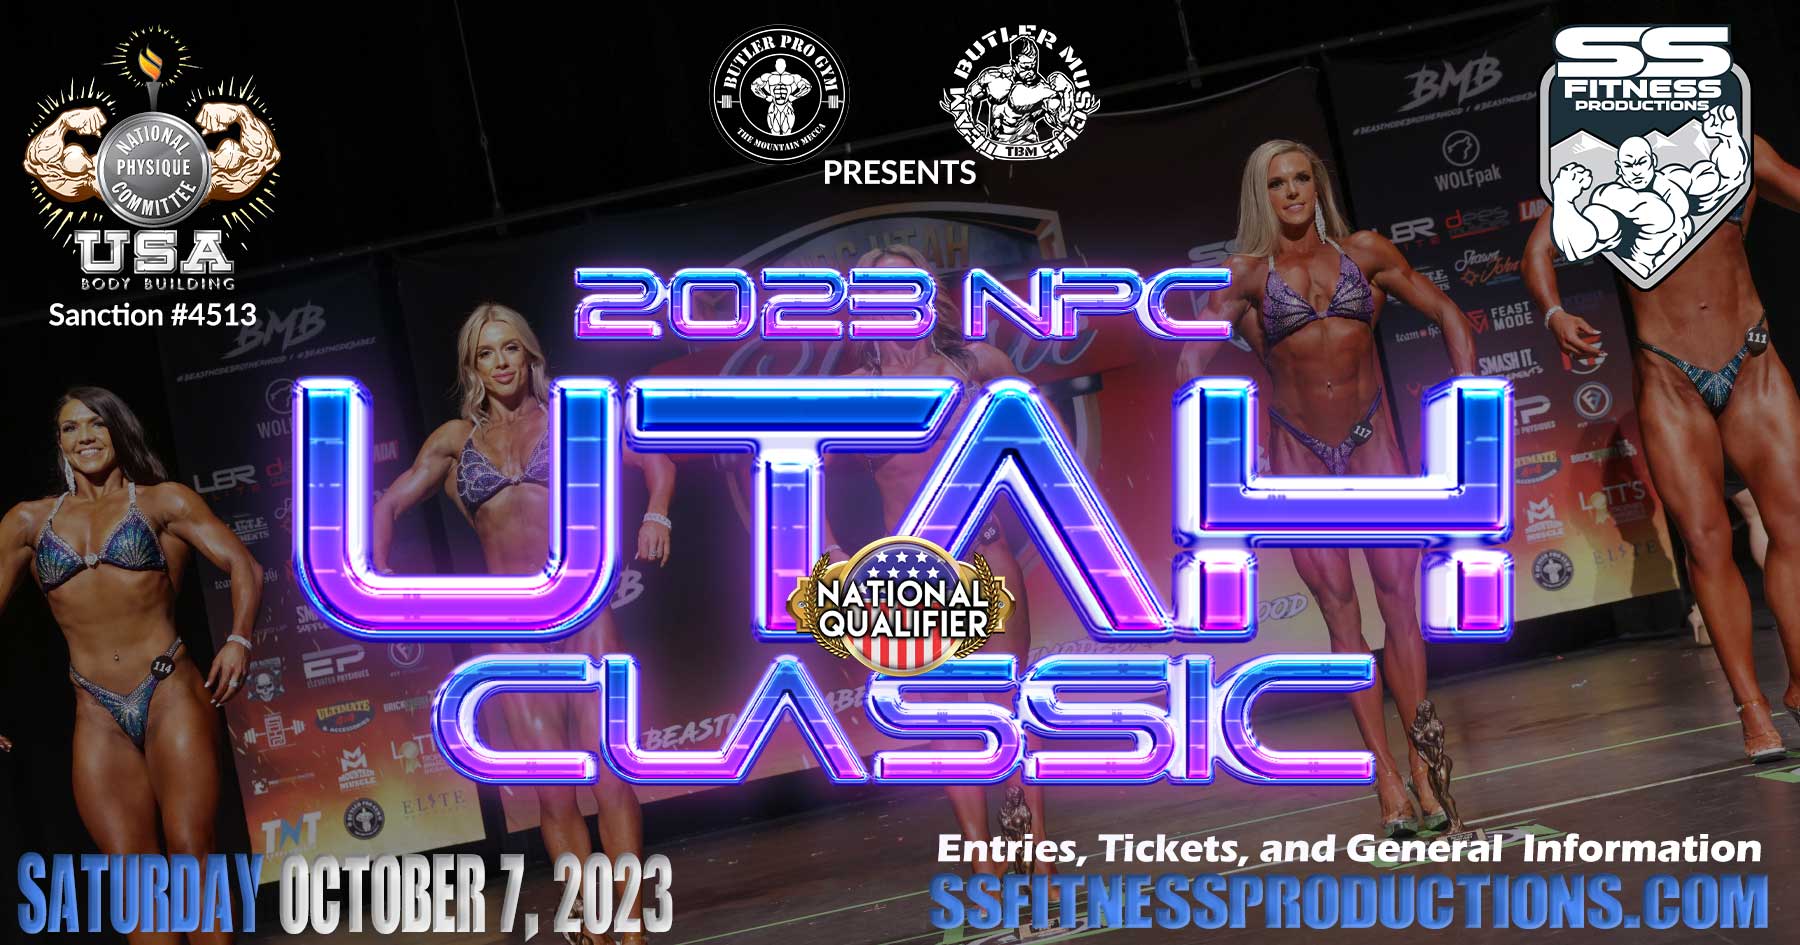 NPC Bodybuilding, Physique, Bikini, Figure, Wellness and Fitness Championships In Utah - SS Fitness Productions